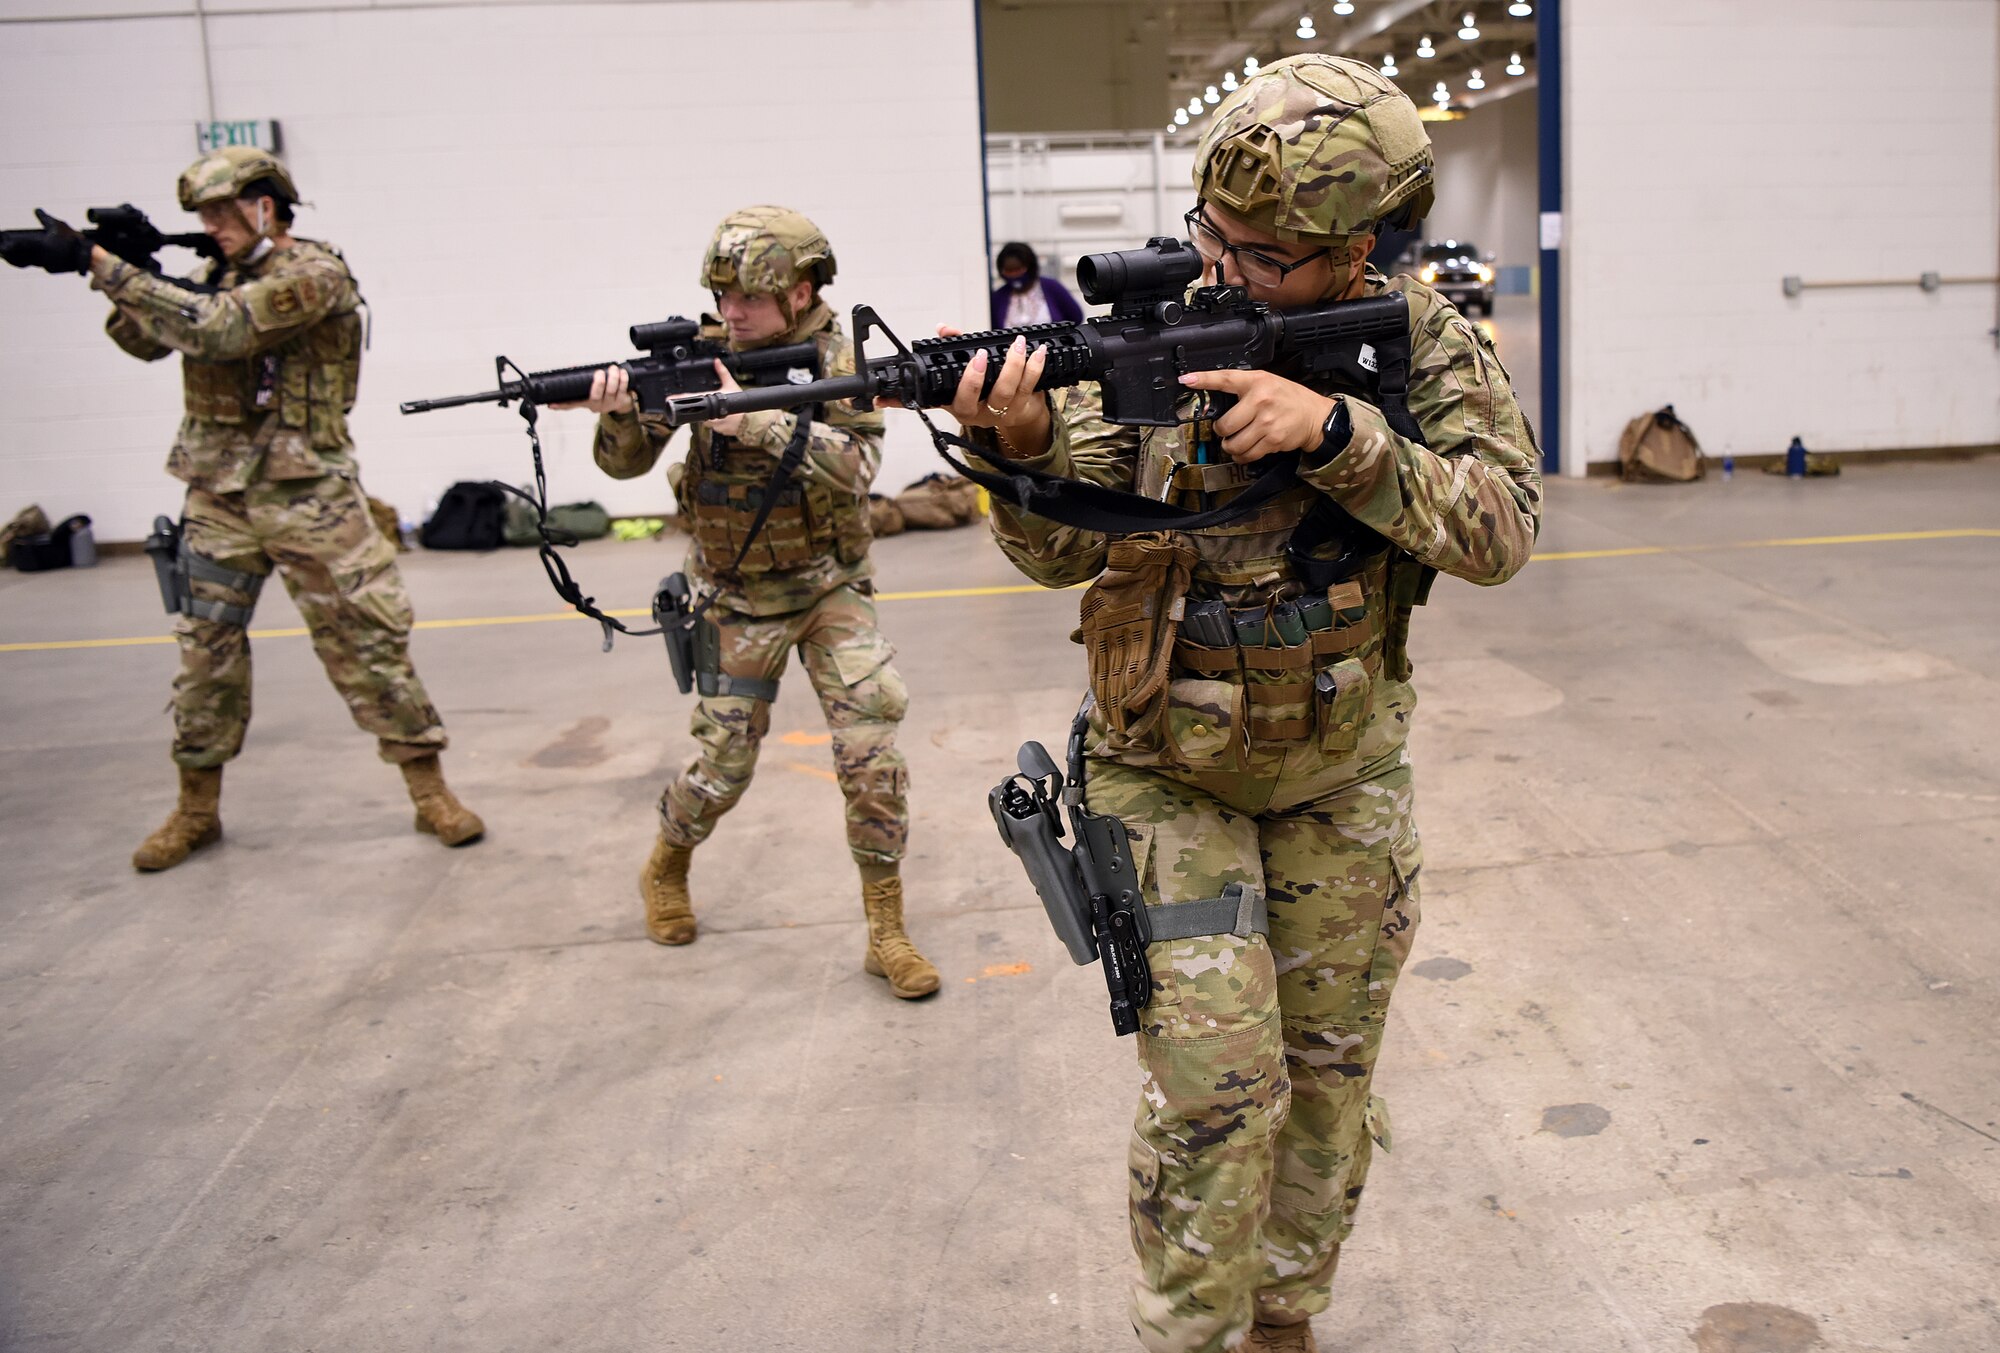 Photo of Airmen with weapons